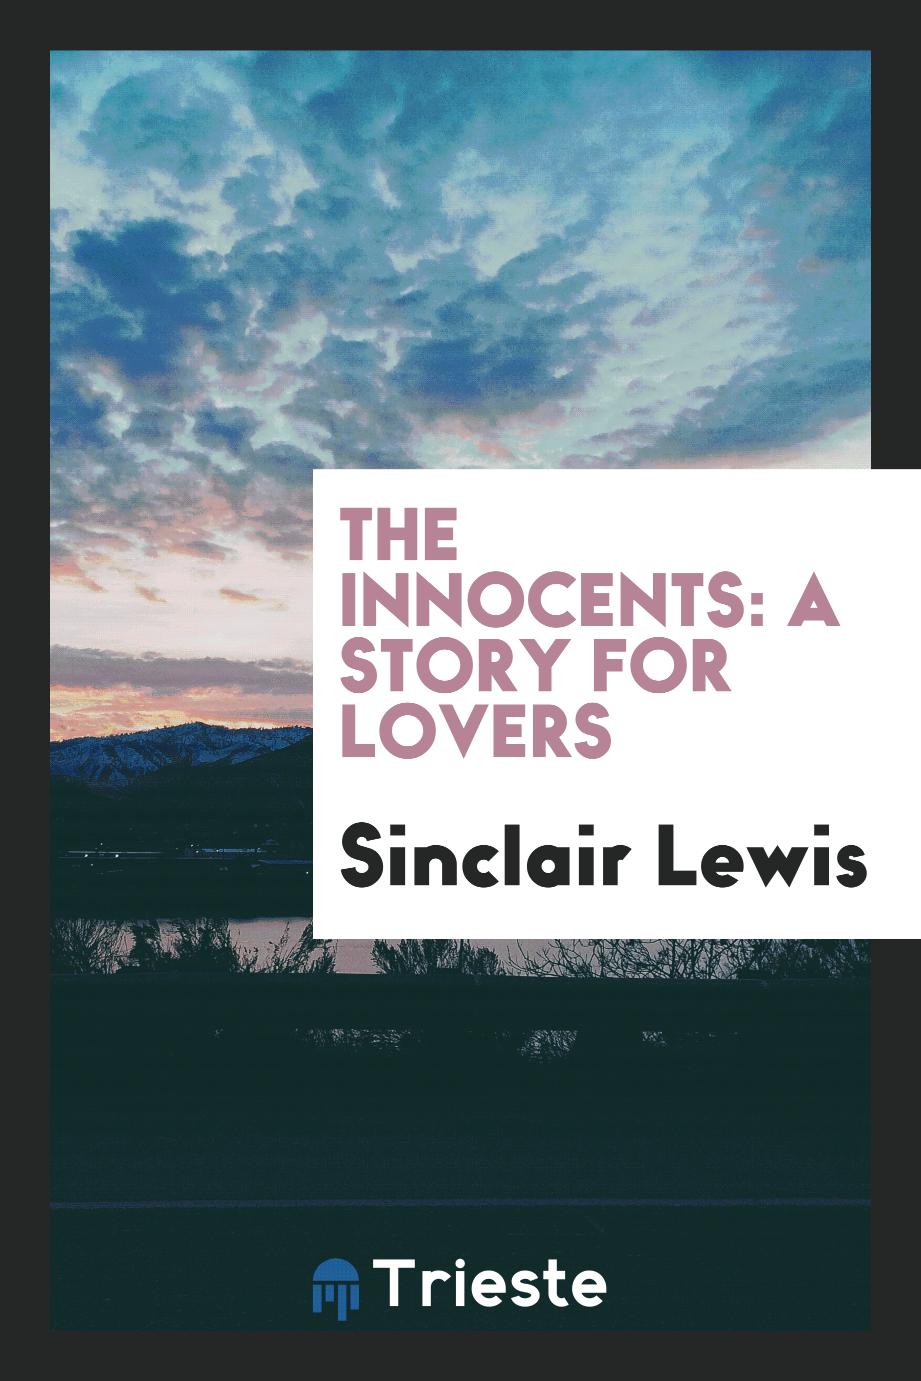 The innocents: a story for lovers